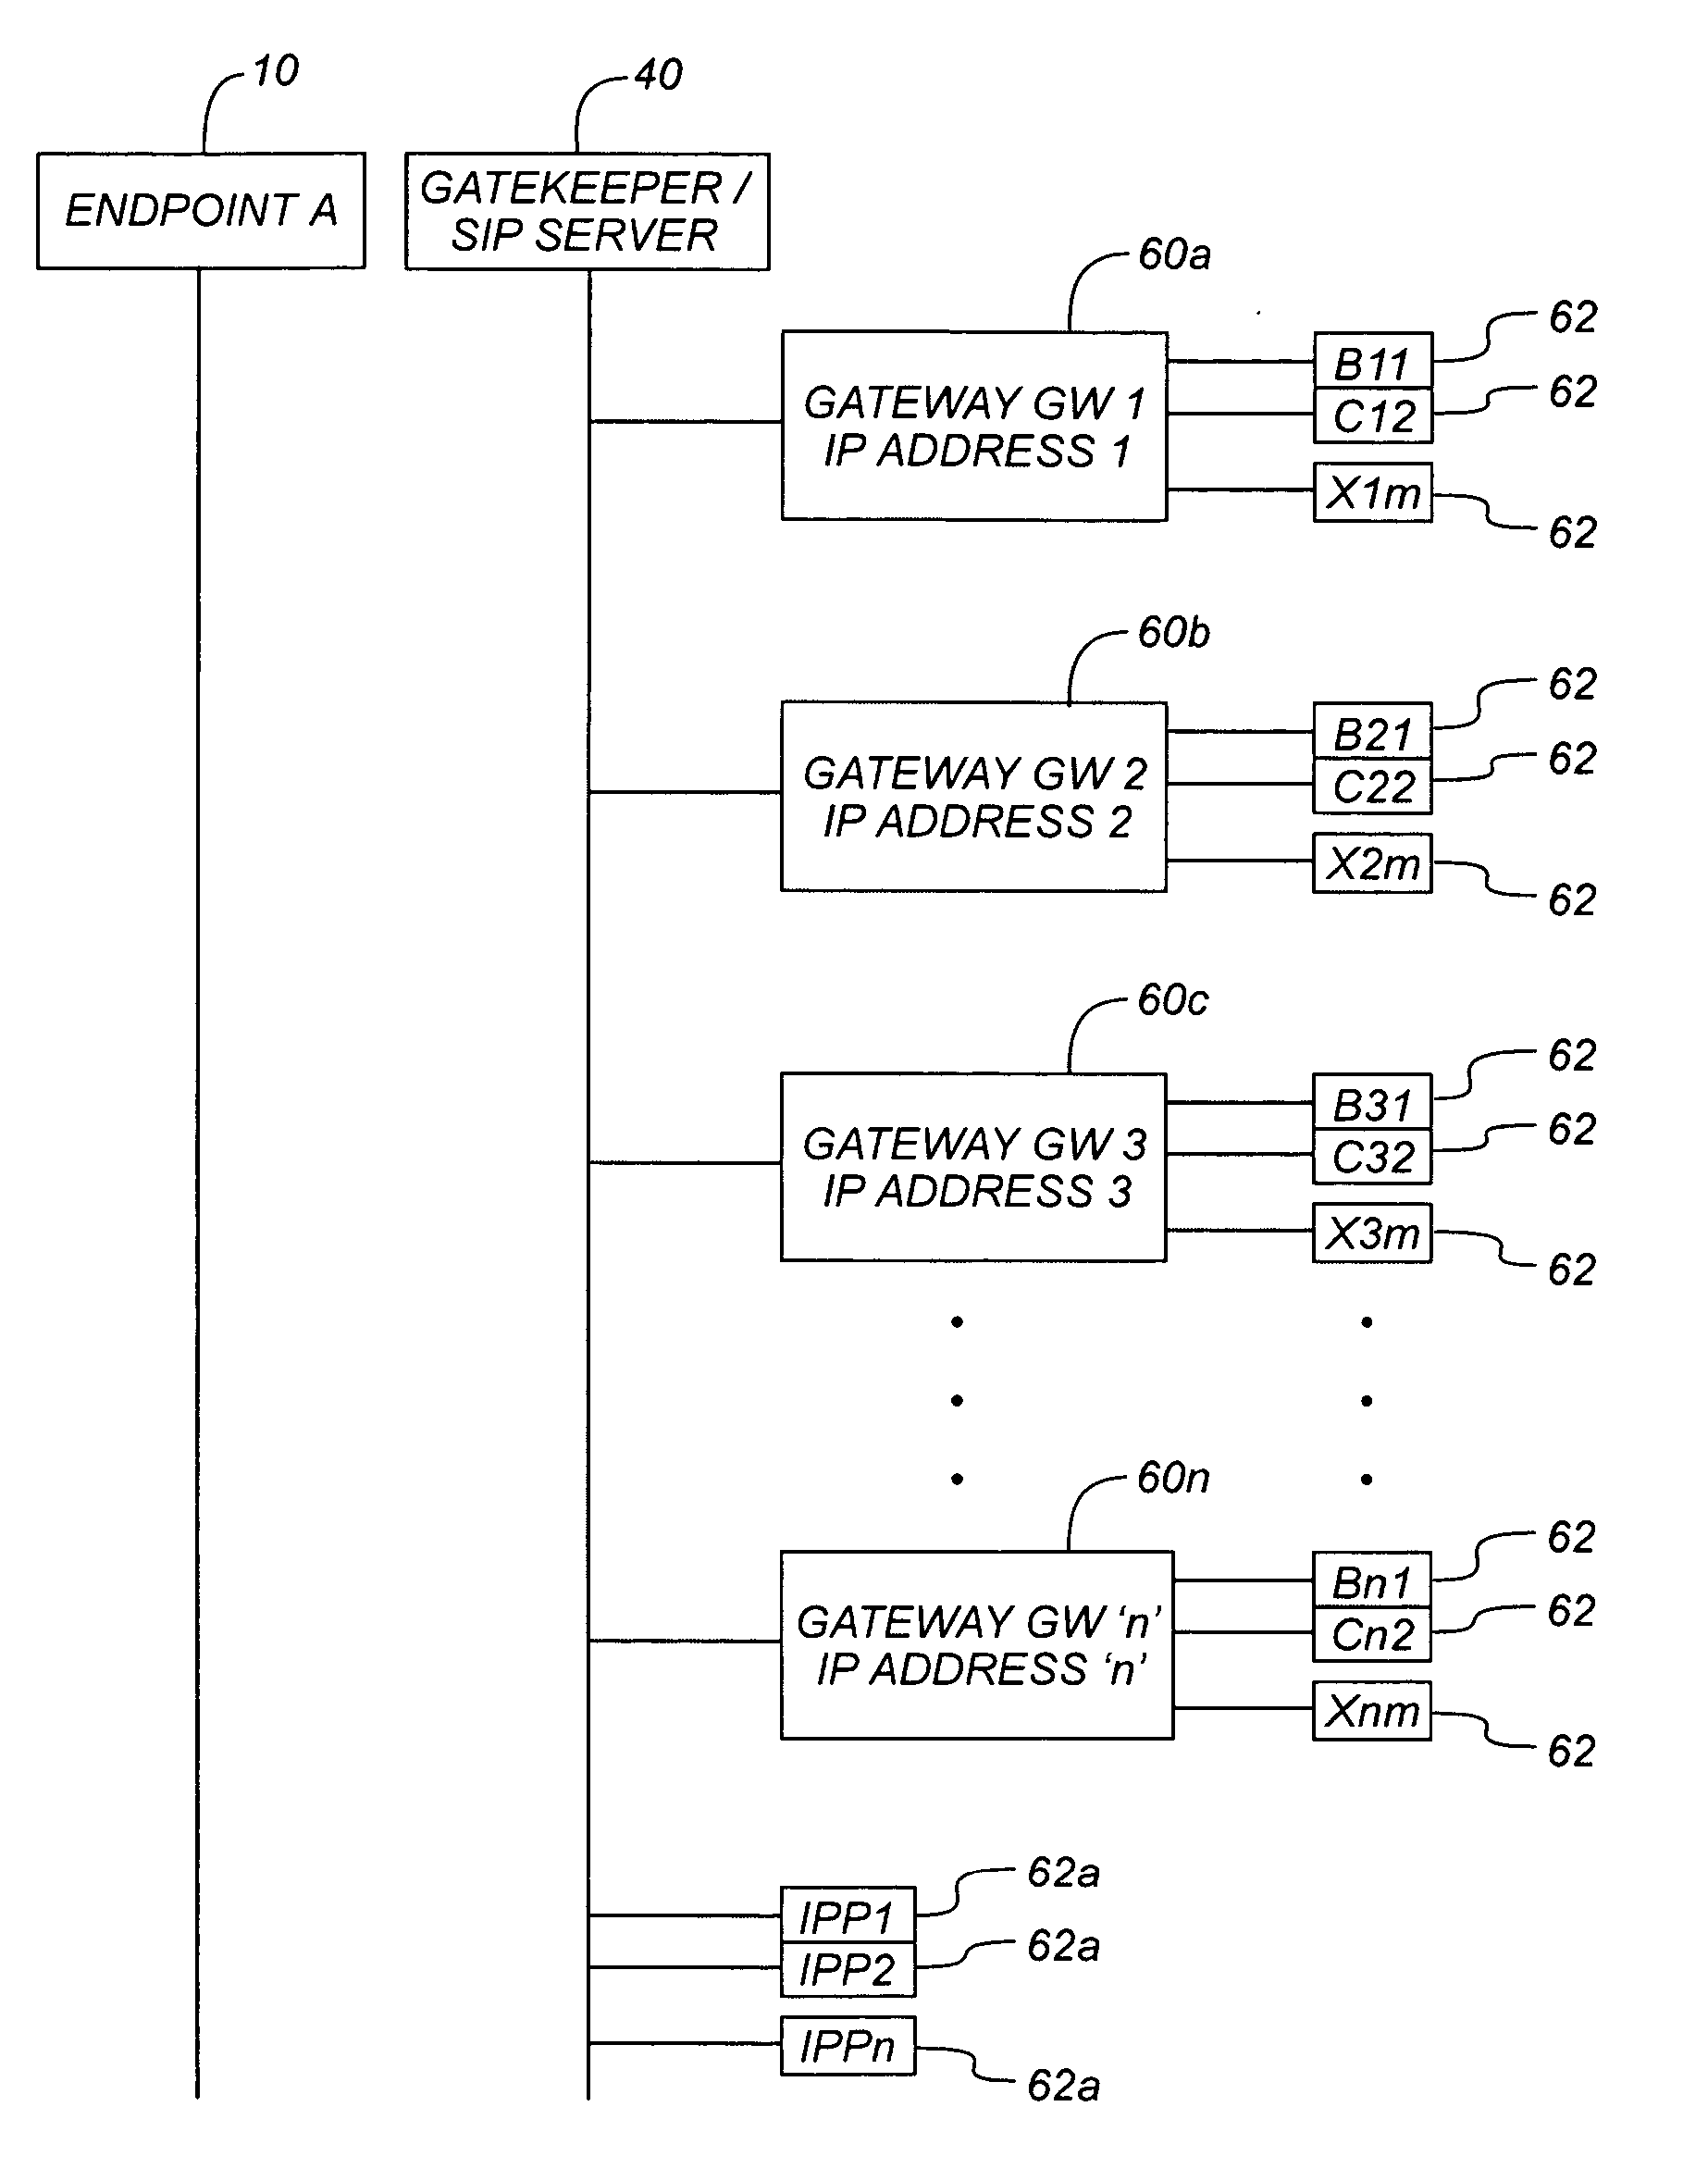 System and method for implementing proxy independent hunt group function in a packet based network